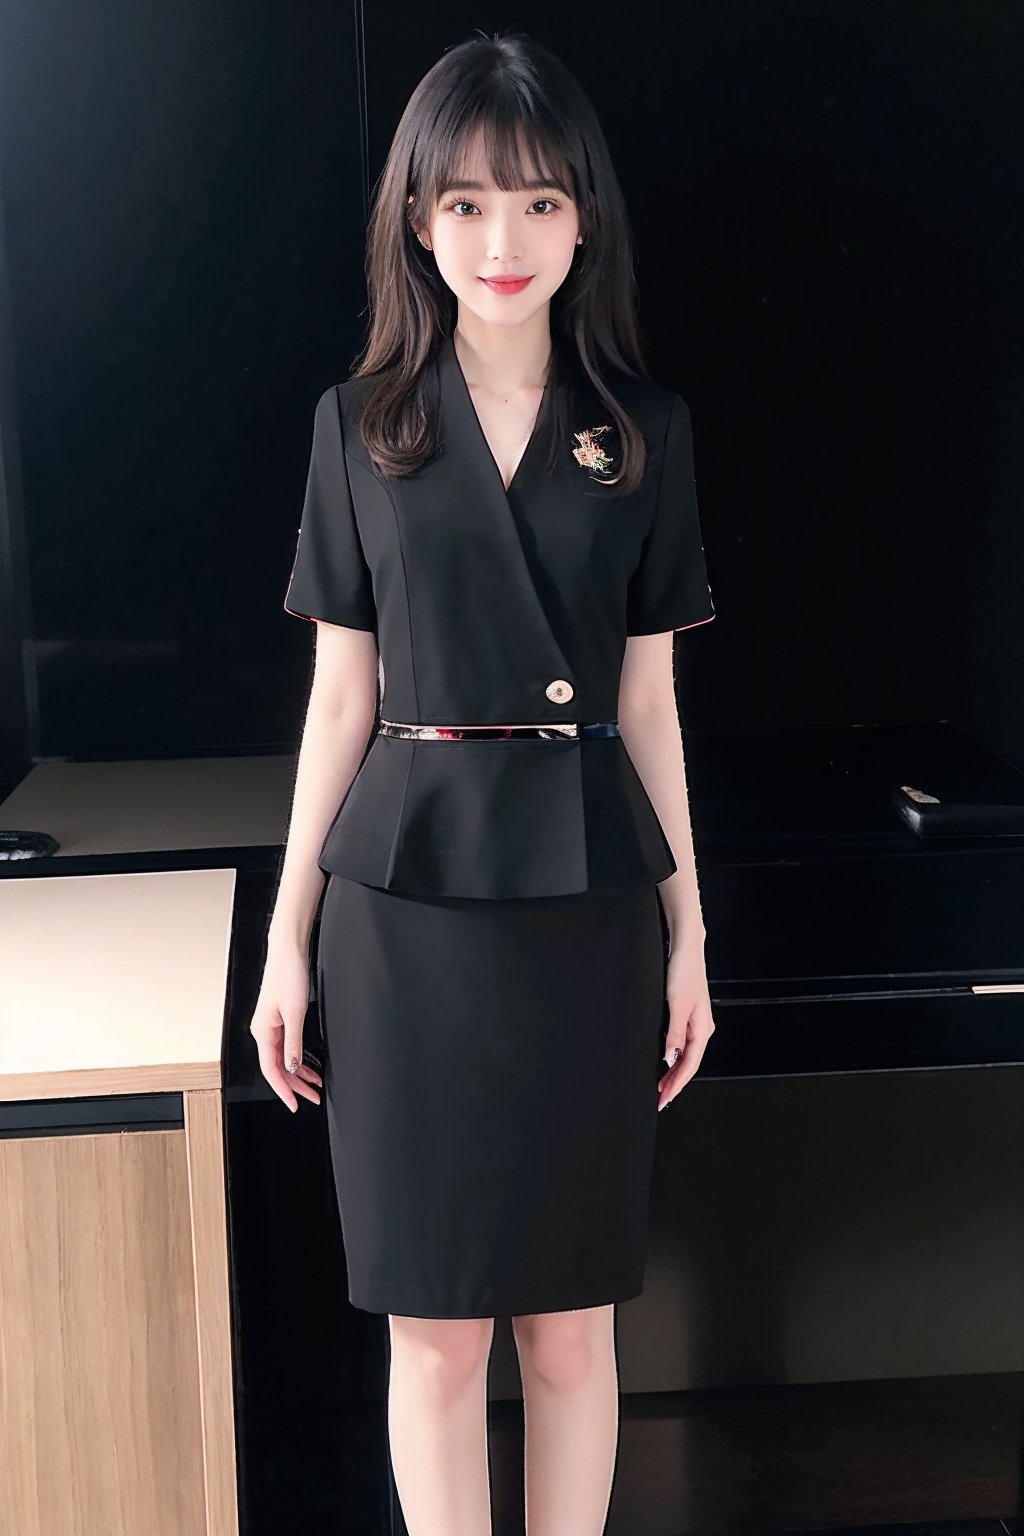 HDR,UHD,8K,best quality,masterpiece,Highly detailed,Studio lighting,ultra-fine painting,sharp focus,physically-based rendering,extreme detail description,Professional,masterpiece, best quality,delicate,beautiful,(1girl:2),(Thin figure:1.5),(black office_lady_uniform:1.5),(looking_at_viewer:1.2), realistic,(blunt bangs:1.2),(standing:1),office background,(Half-length photo:1),(smile:1),